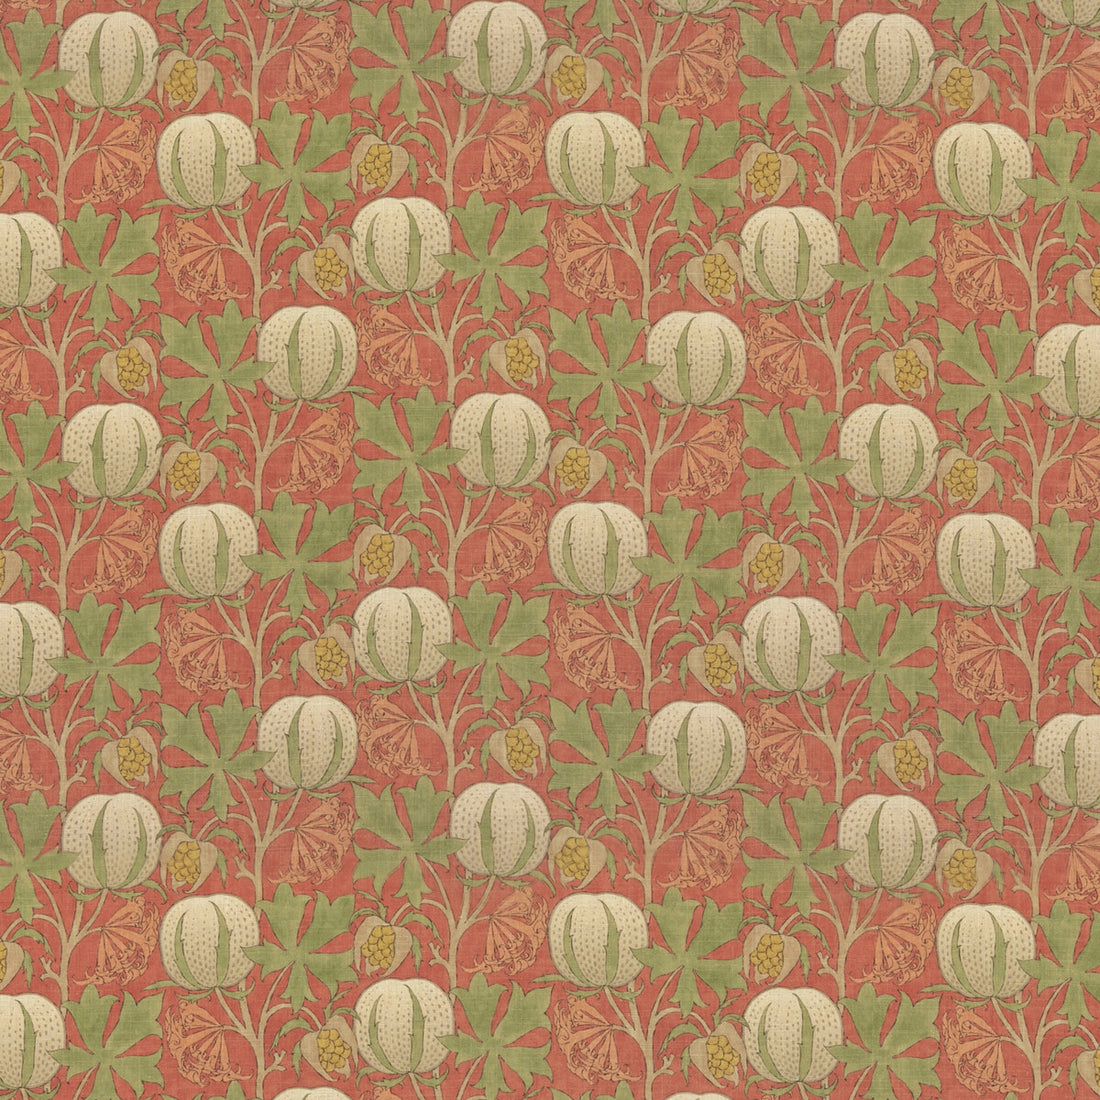 Pumpkins fabric in red/green color - pattern BP10981.1.0 - by G P &amp; J Baker in the Original Brantwood Fabric collection